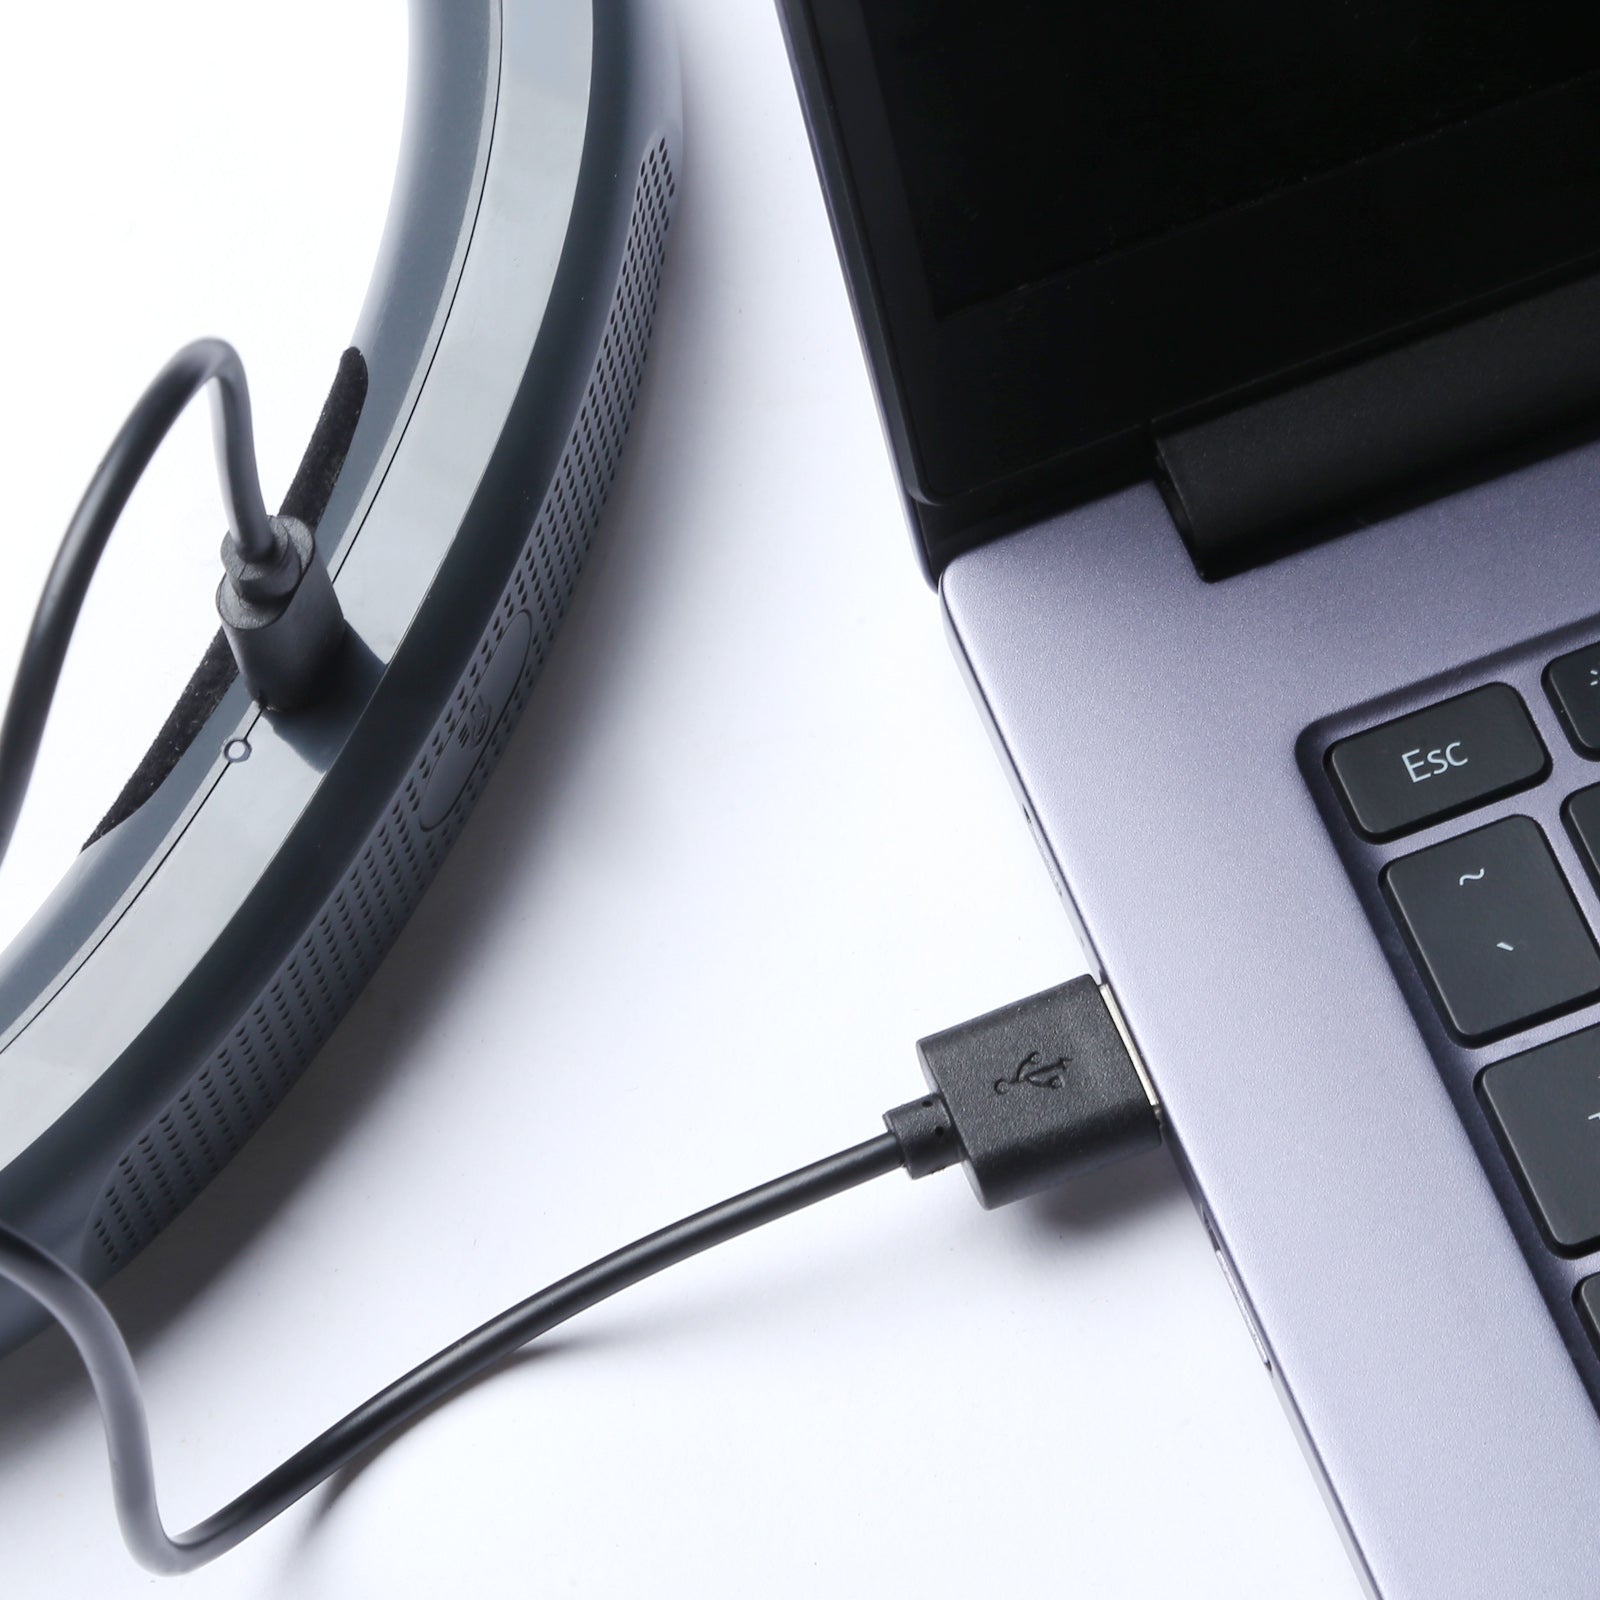 Glocusent Type-C Charging Cord for LED Rechargeable Lights Products | Can be used with Laptops